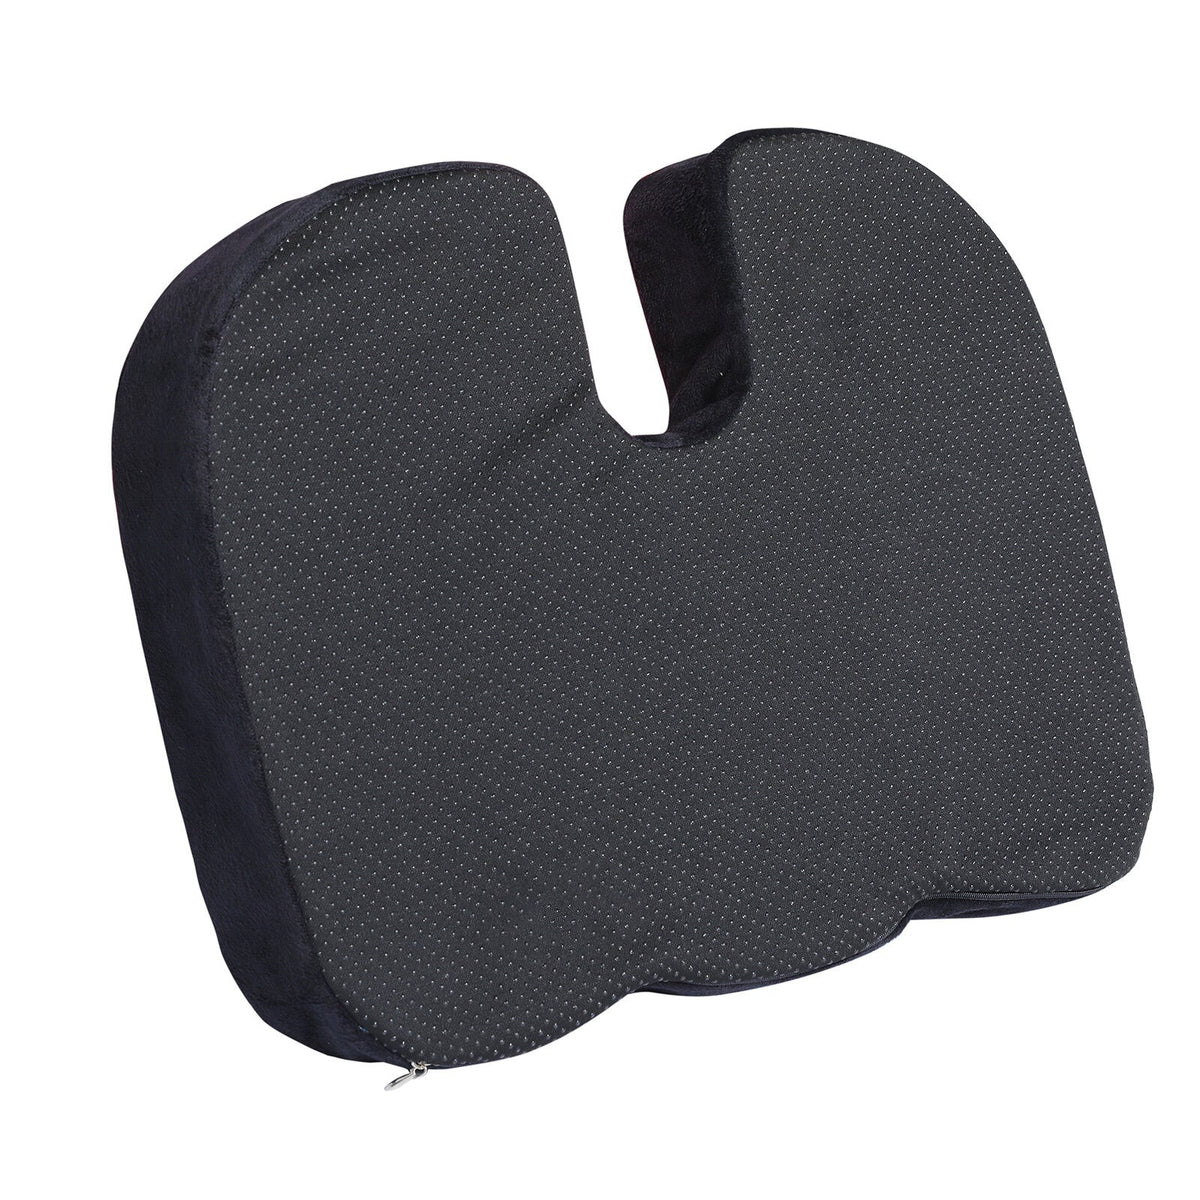 Essort Lumbar Support Pillow Coccyx Seat Cushion Office Chair Seat Cushion Black Back Support Pillow for Chair Memory Foam Desk Chair Cushion for Back Pain Back Pillow